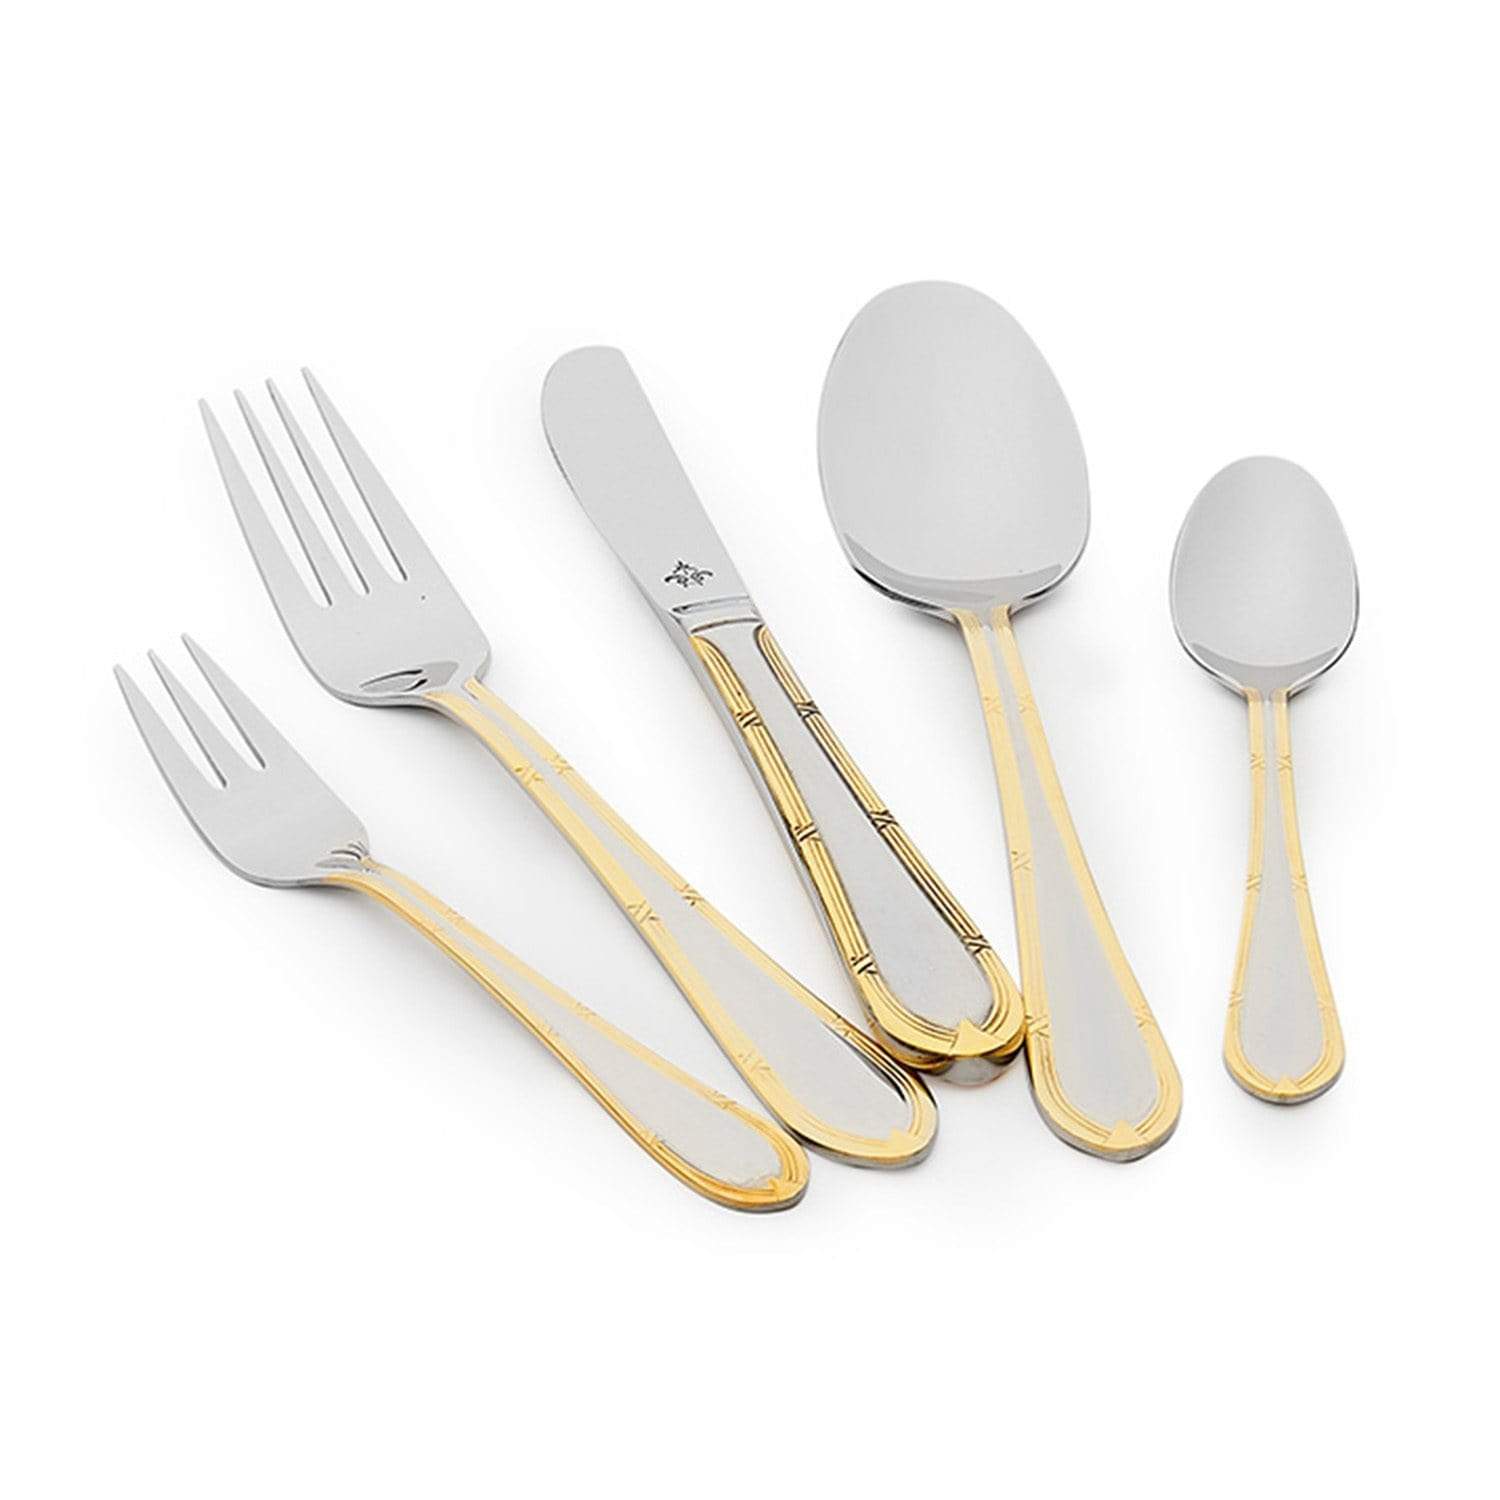 Hester Gold Plated Cutlery Box Set - Silver, 68 Piece - GL29/GPBX - Jashanmal Home